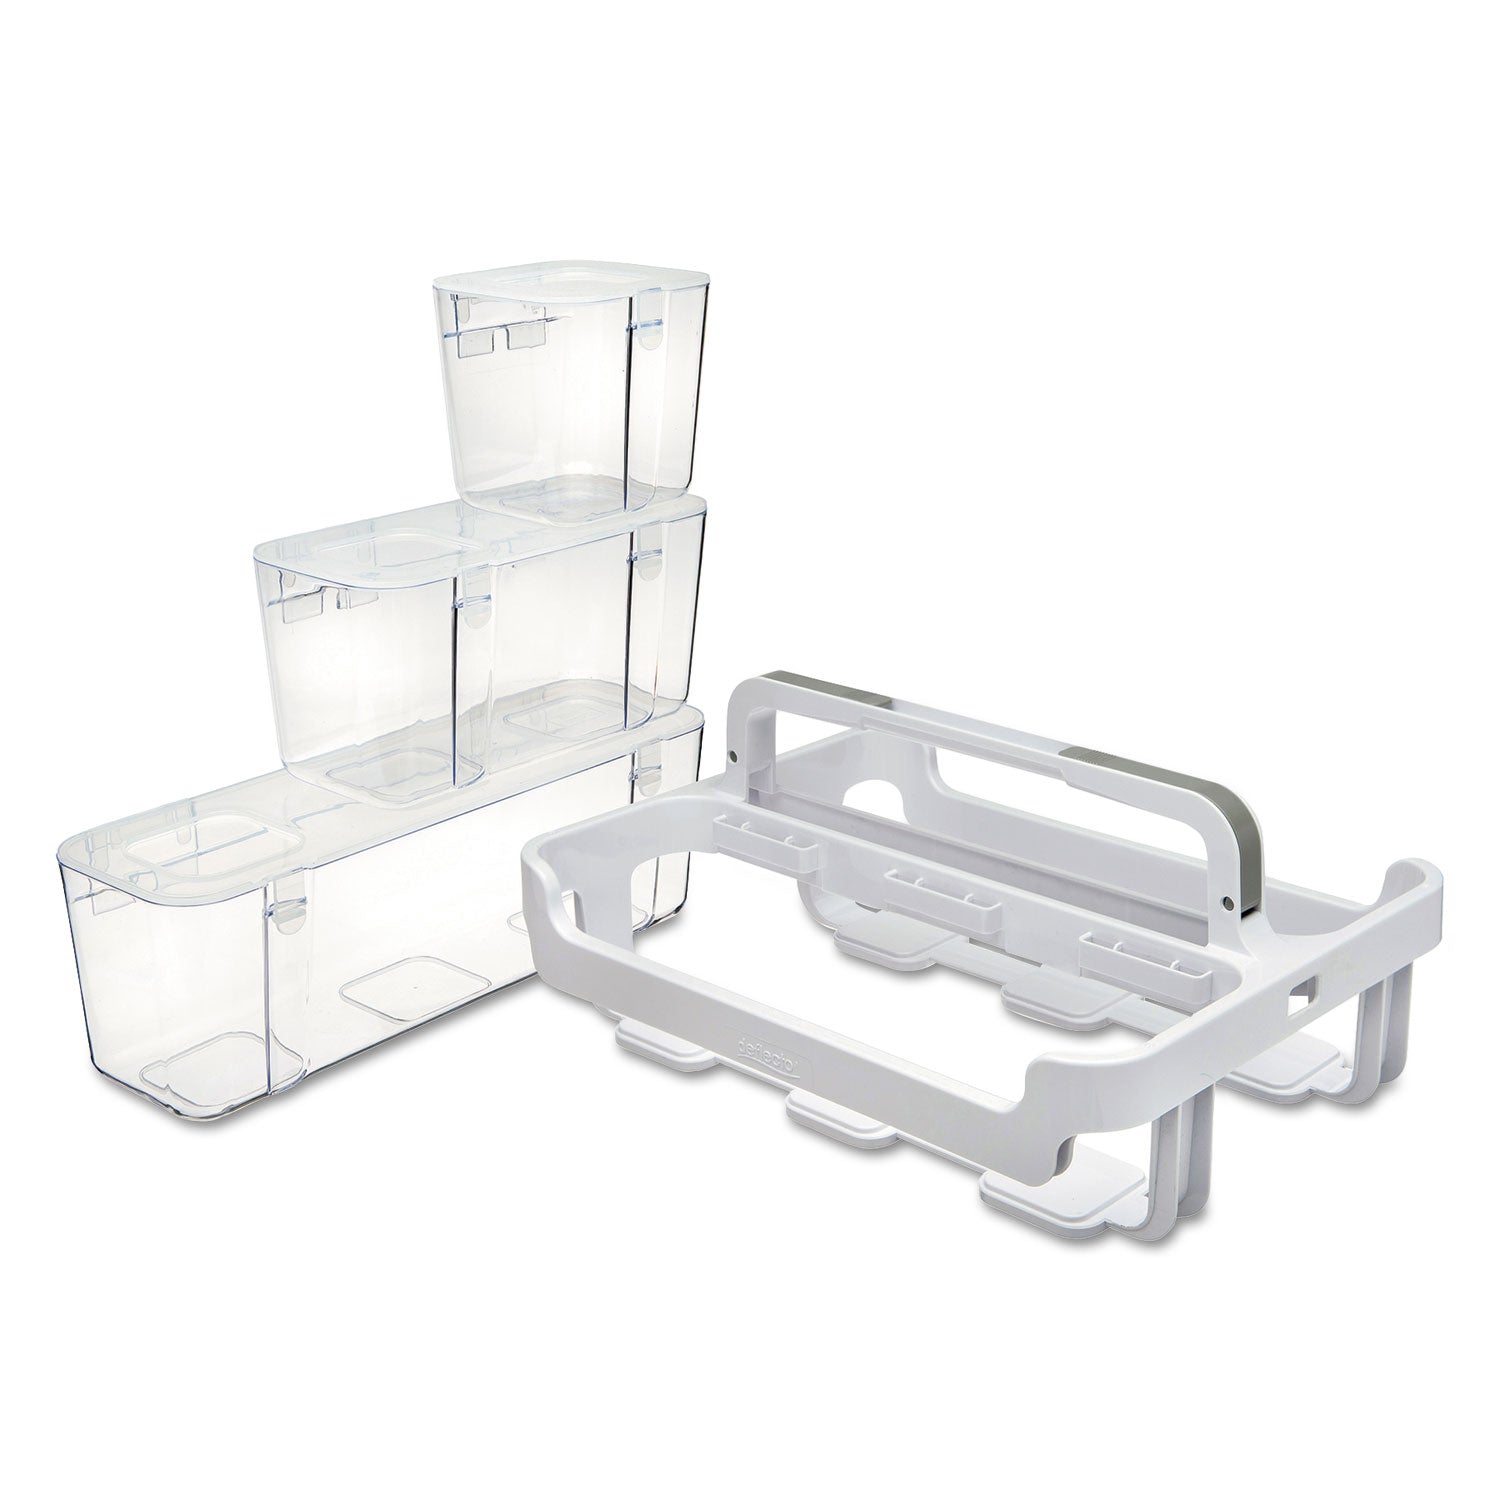 stackable-caddy-organizer-with-s-m-and-l-containers-plastic-105-x-14-x-65-white-caddy-clear-containers_def29003 - 3